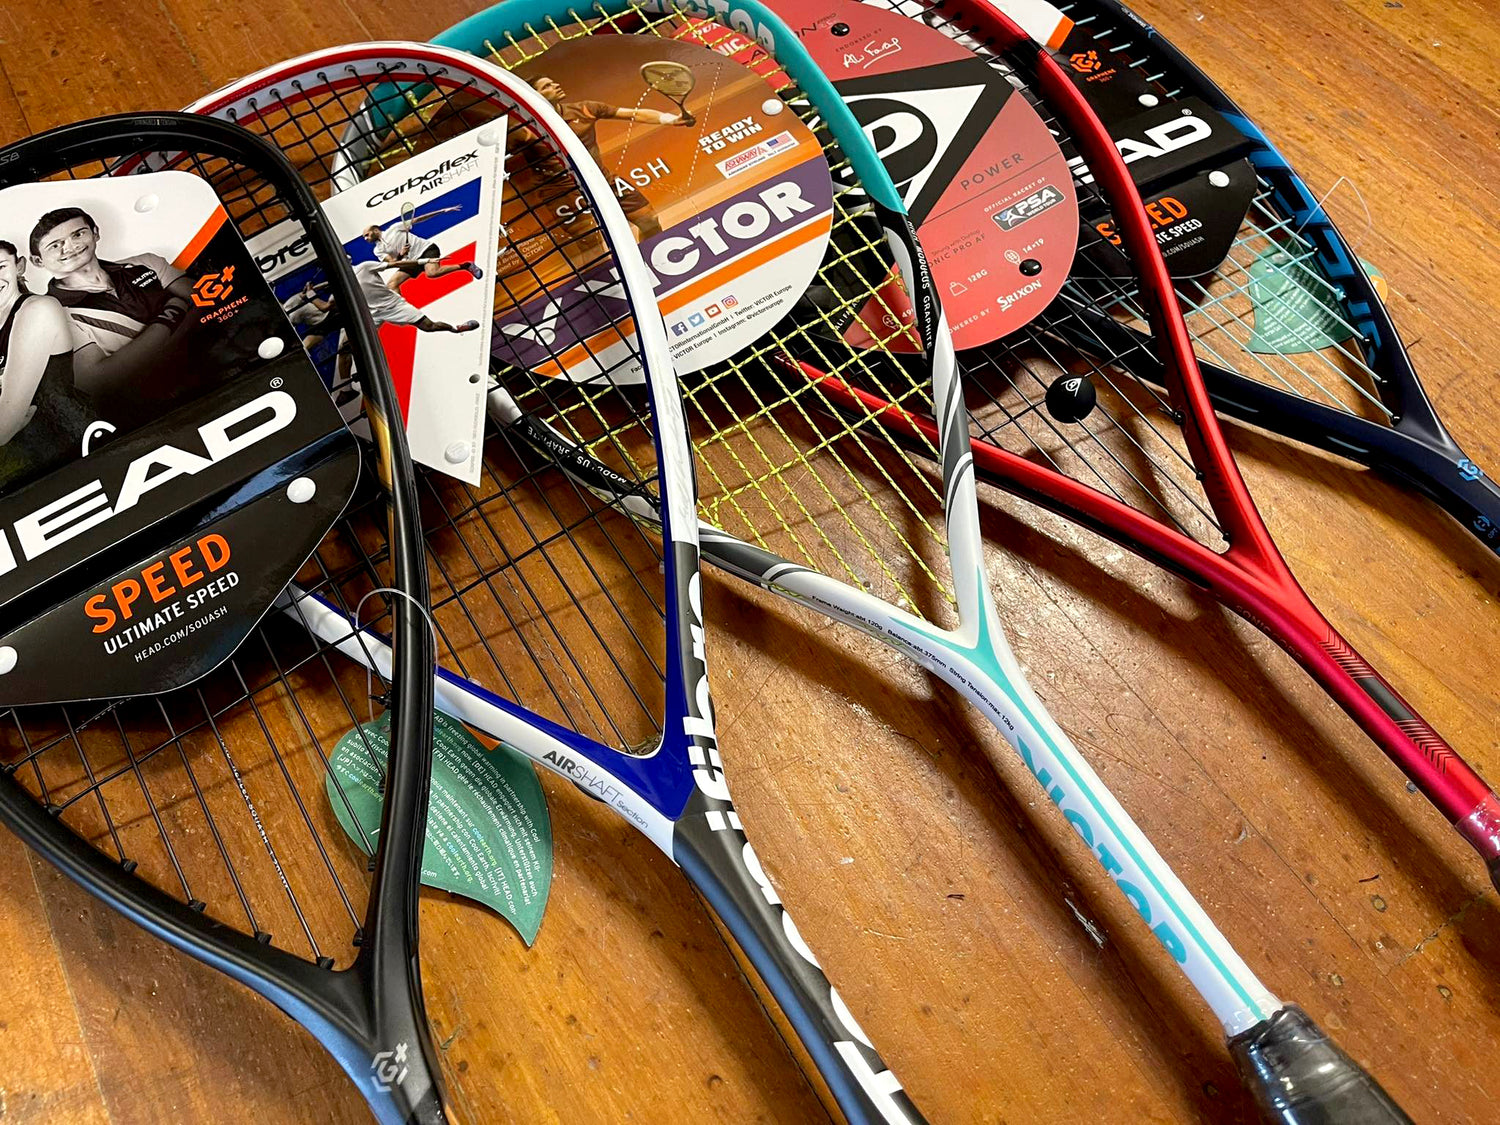 Top 5 Squash Racquets for 2021: Find the Perfect Racquet for Your Game